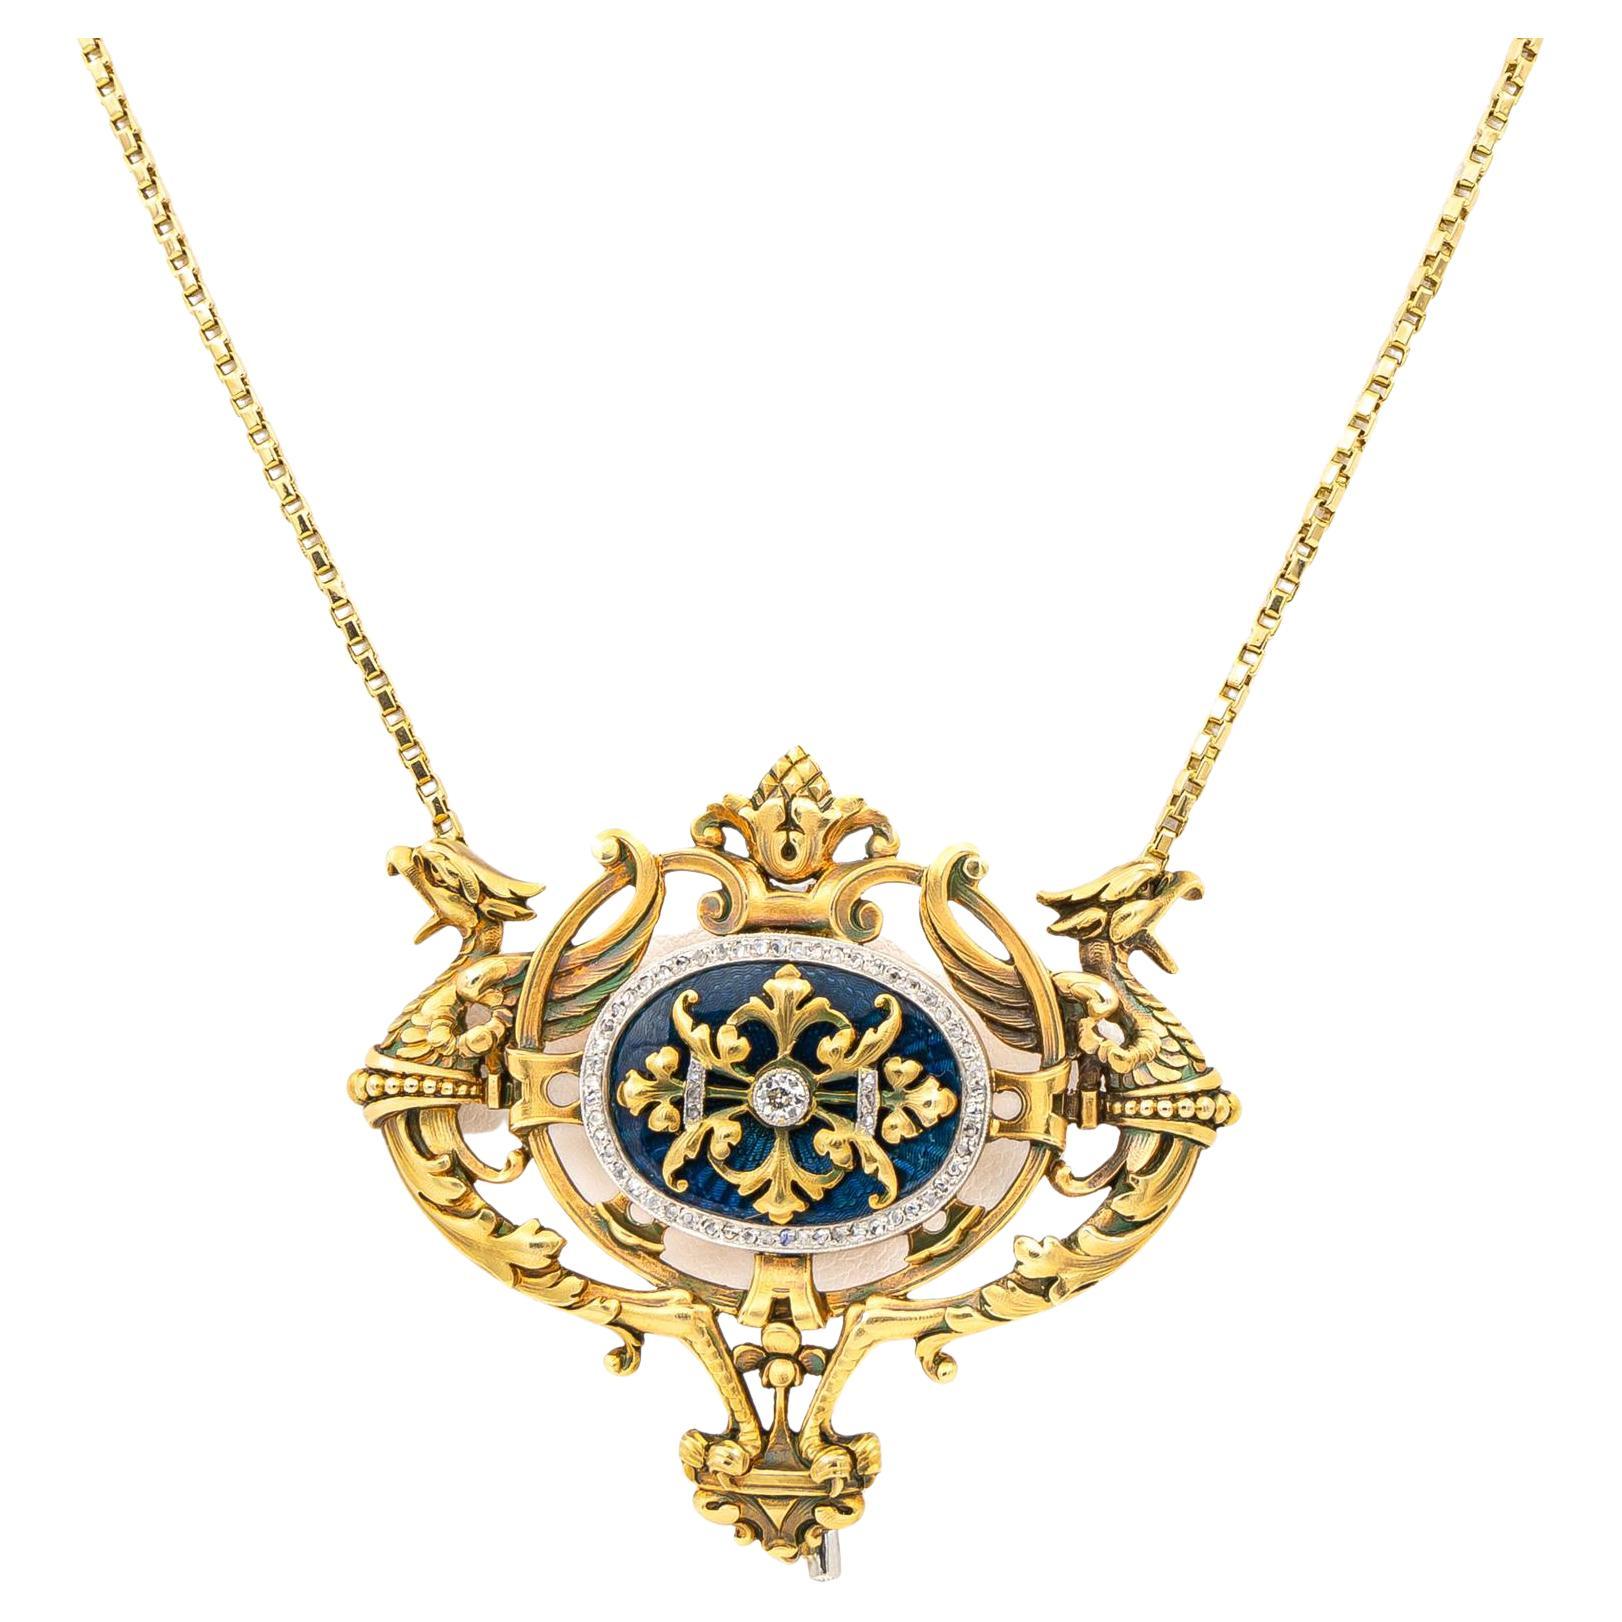 Chain Necklace Yellow Gold Diamond For Sale